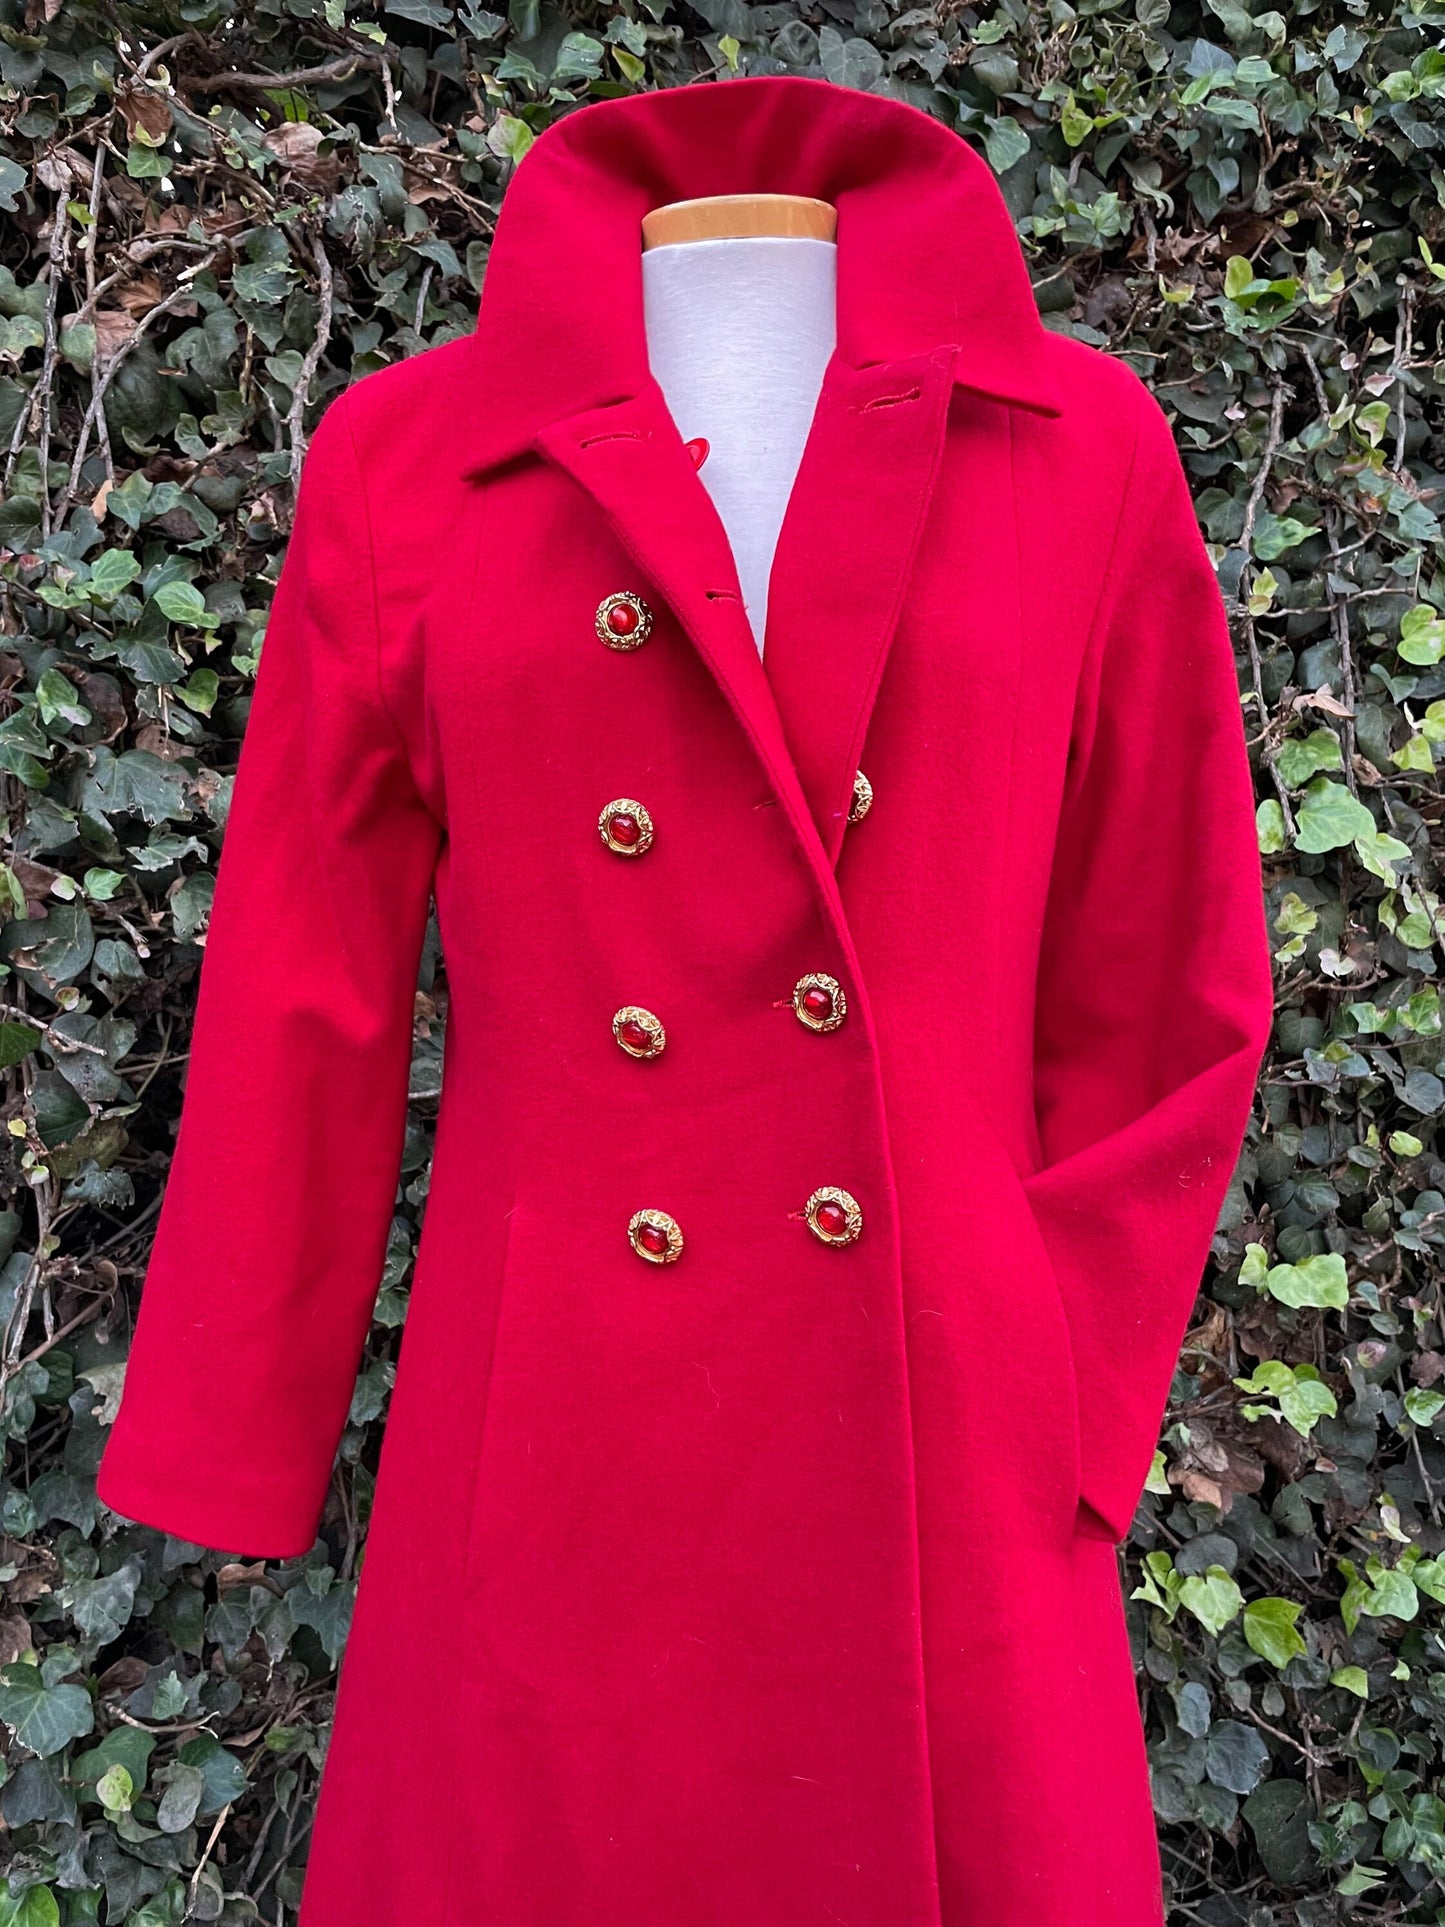 Vintage Red Wool Jewel Button Red Long Peacoat